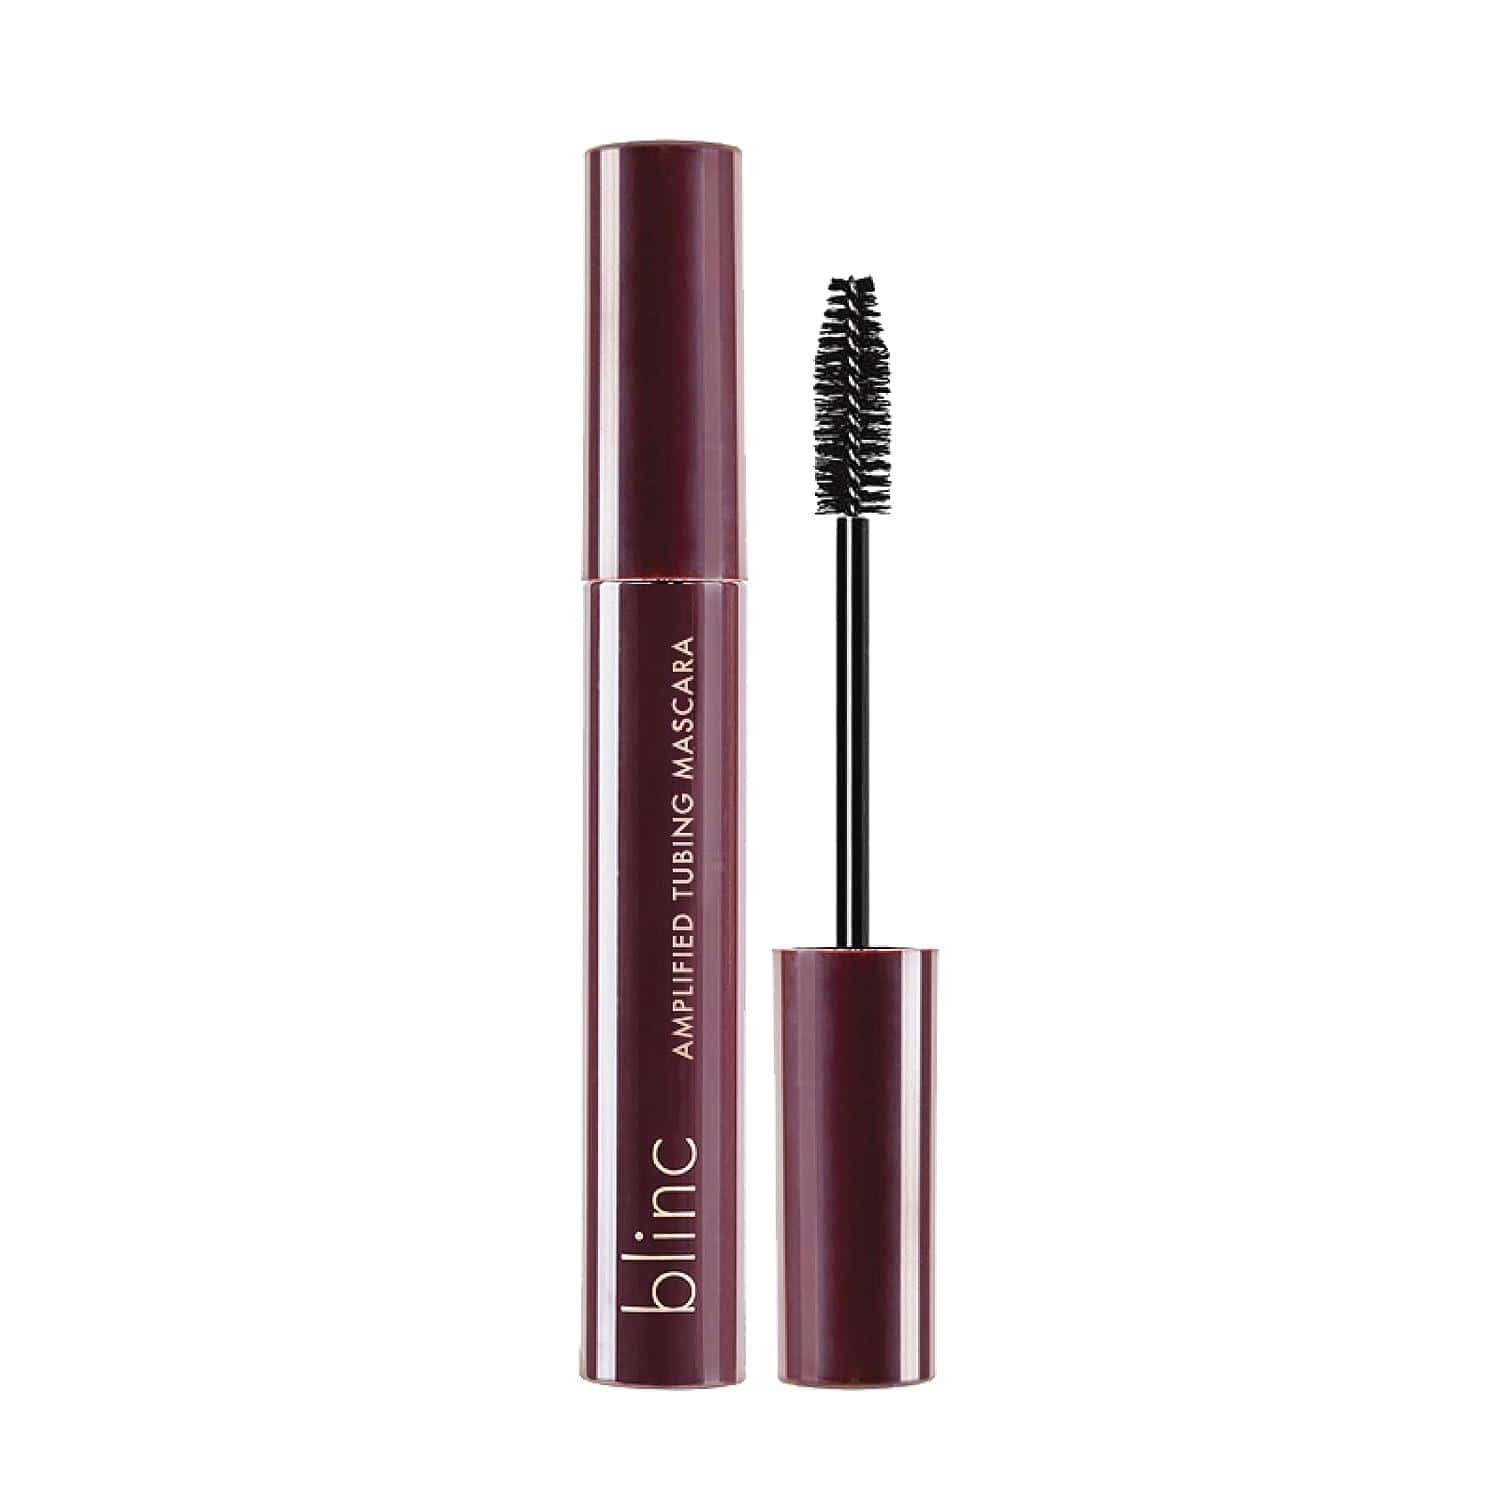 Blinc's tubing mascara delivers length and volume seamlessly, without any smudging. The unique wand ensures dramatic lashes without clumps, earning its spot in my collection of volumizing mascaras.